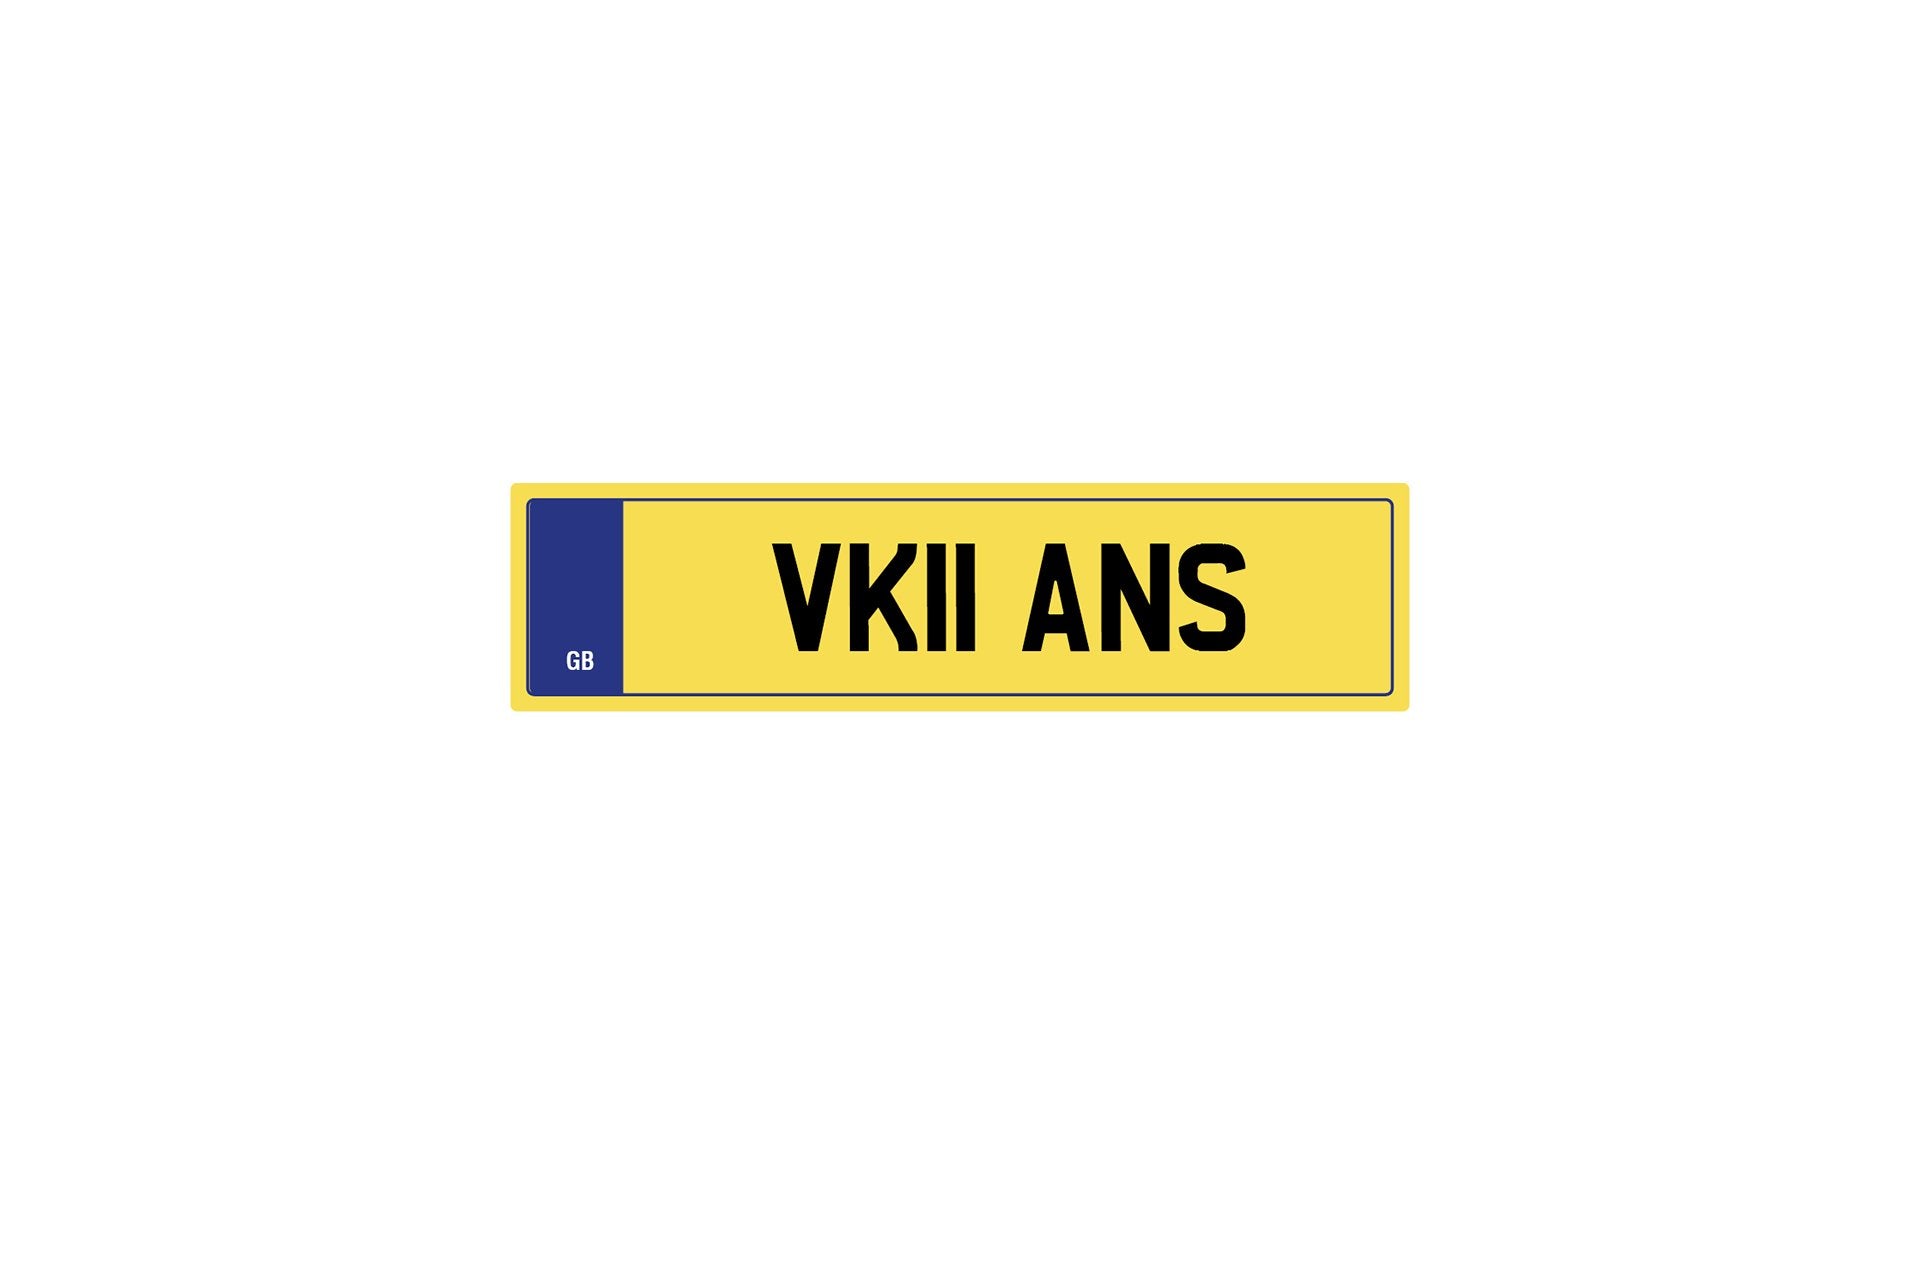 Private Plate Vk11 Ans by Kahn - Image 187